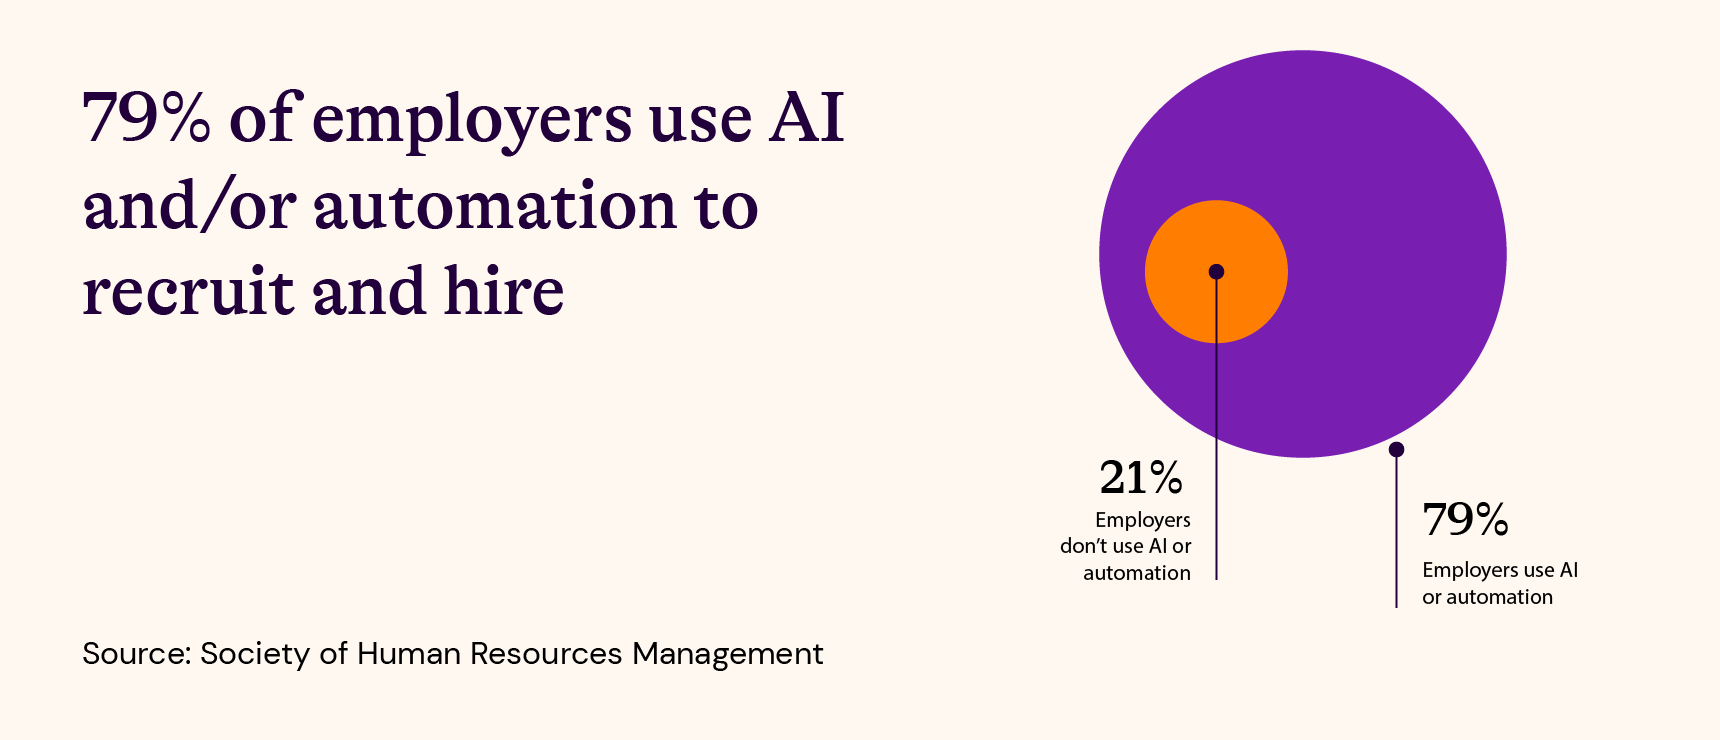 79% of employers use AI and/or automation to recruit and hire according to a survey by the Society of Human Resources Management